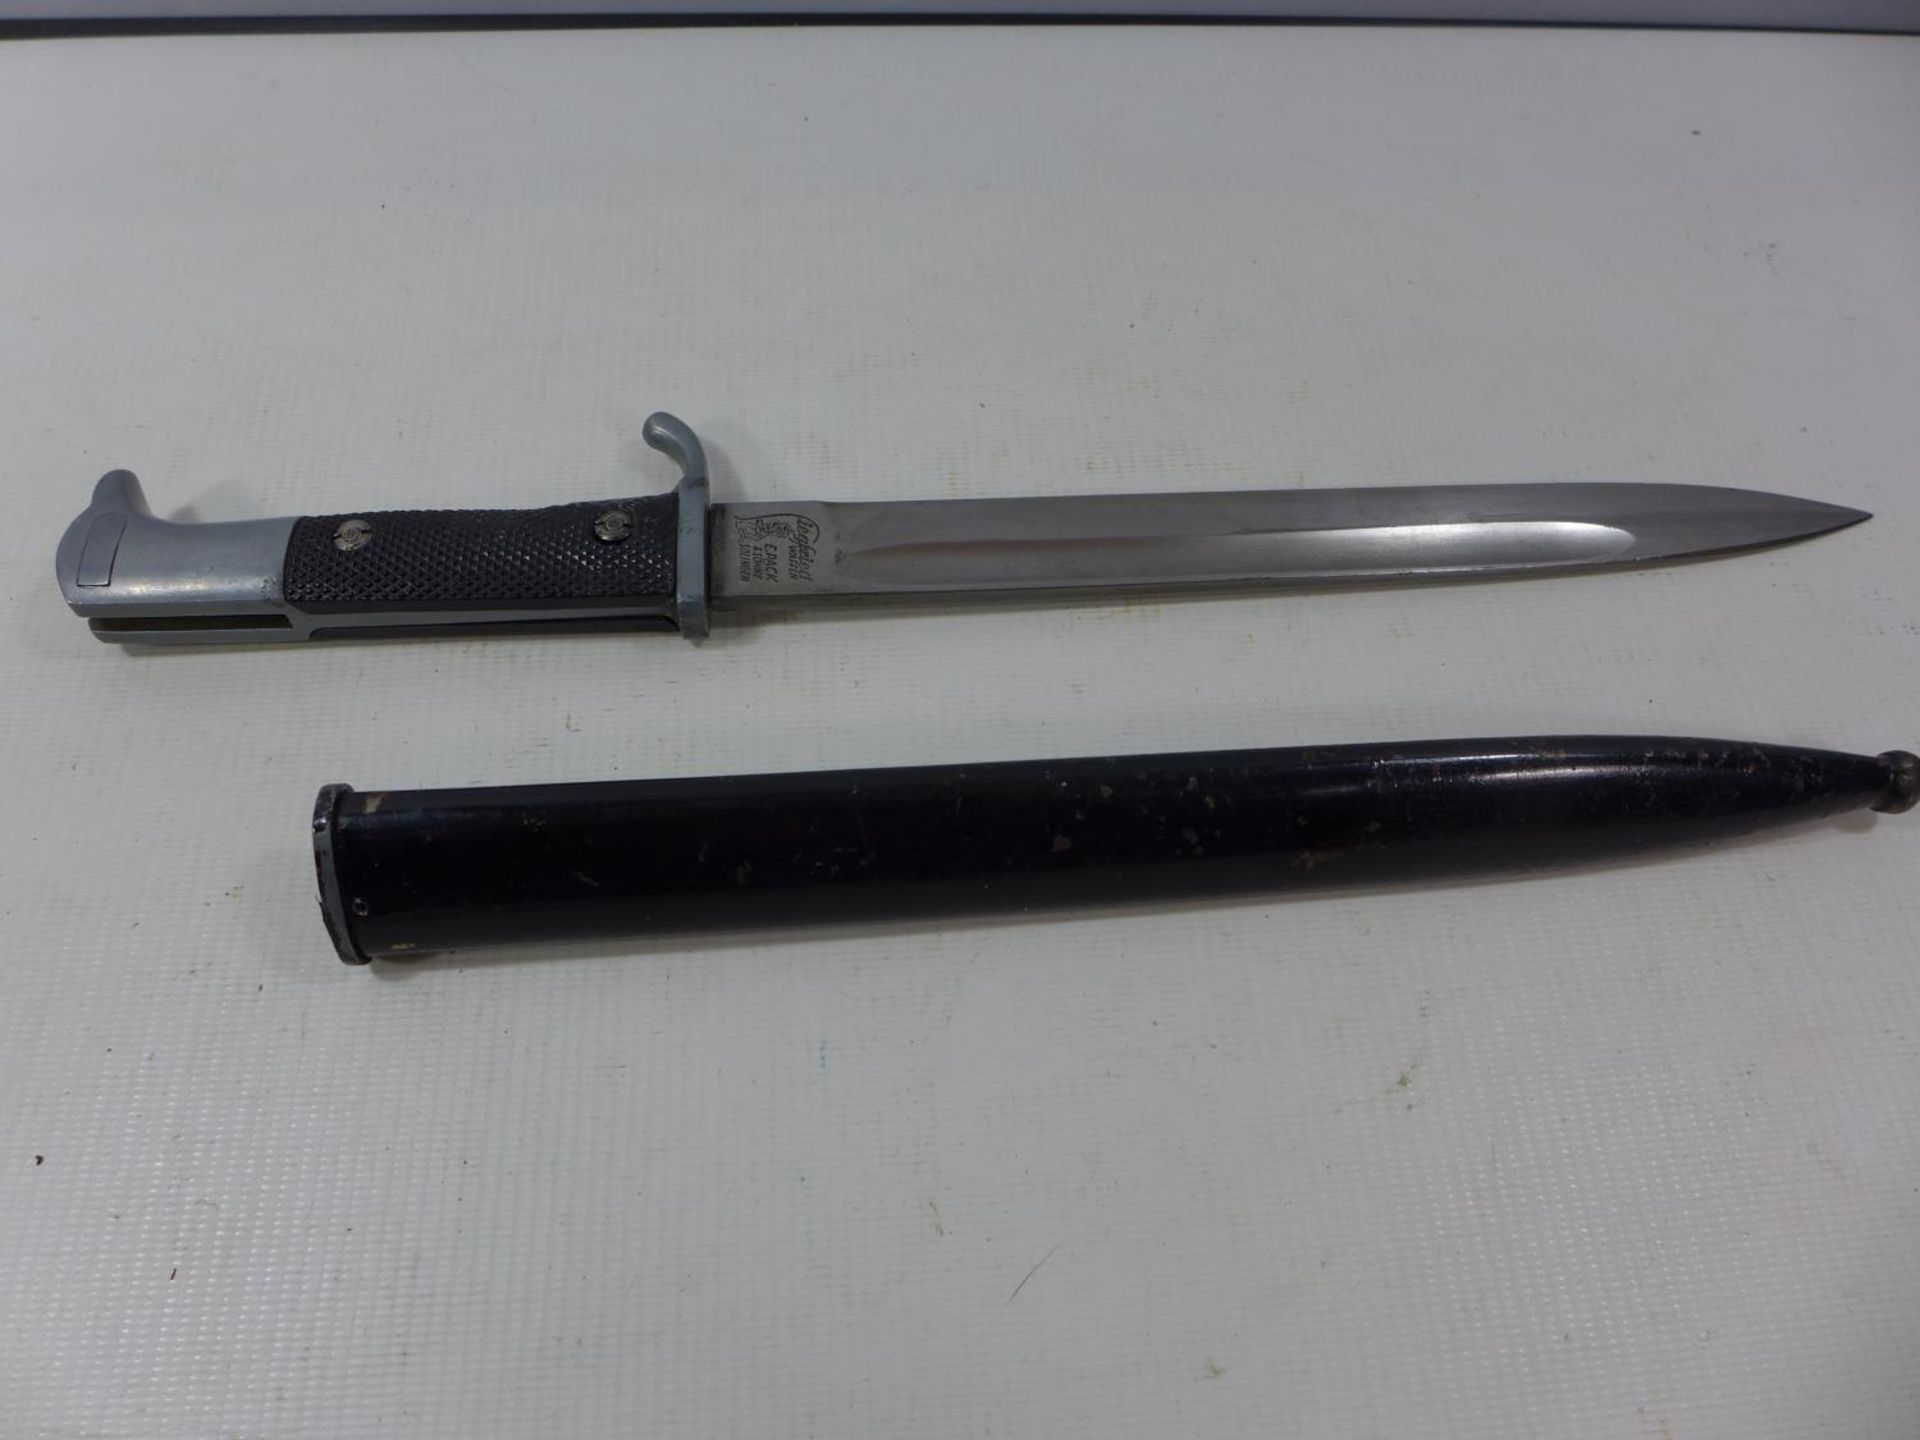 A GERMAN K98 BAYONET, 24.5CM BLADE STAMPED SIEGFRIED WAFFEN, E.PACK AND SOHNE SOLINGEN, METAL - Image 2 of 4